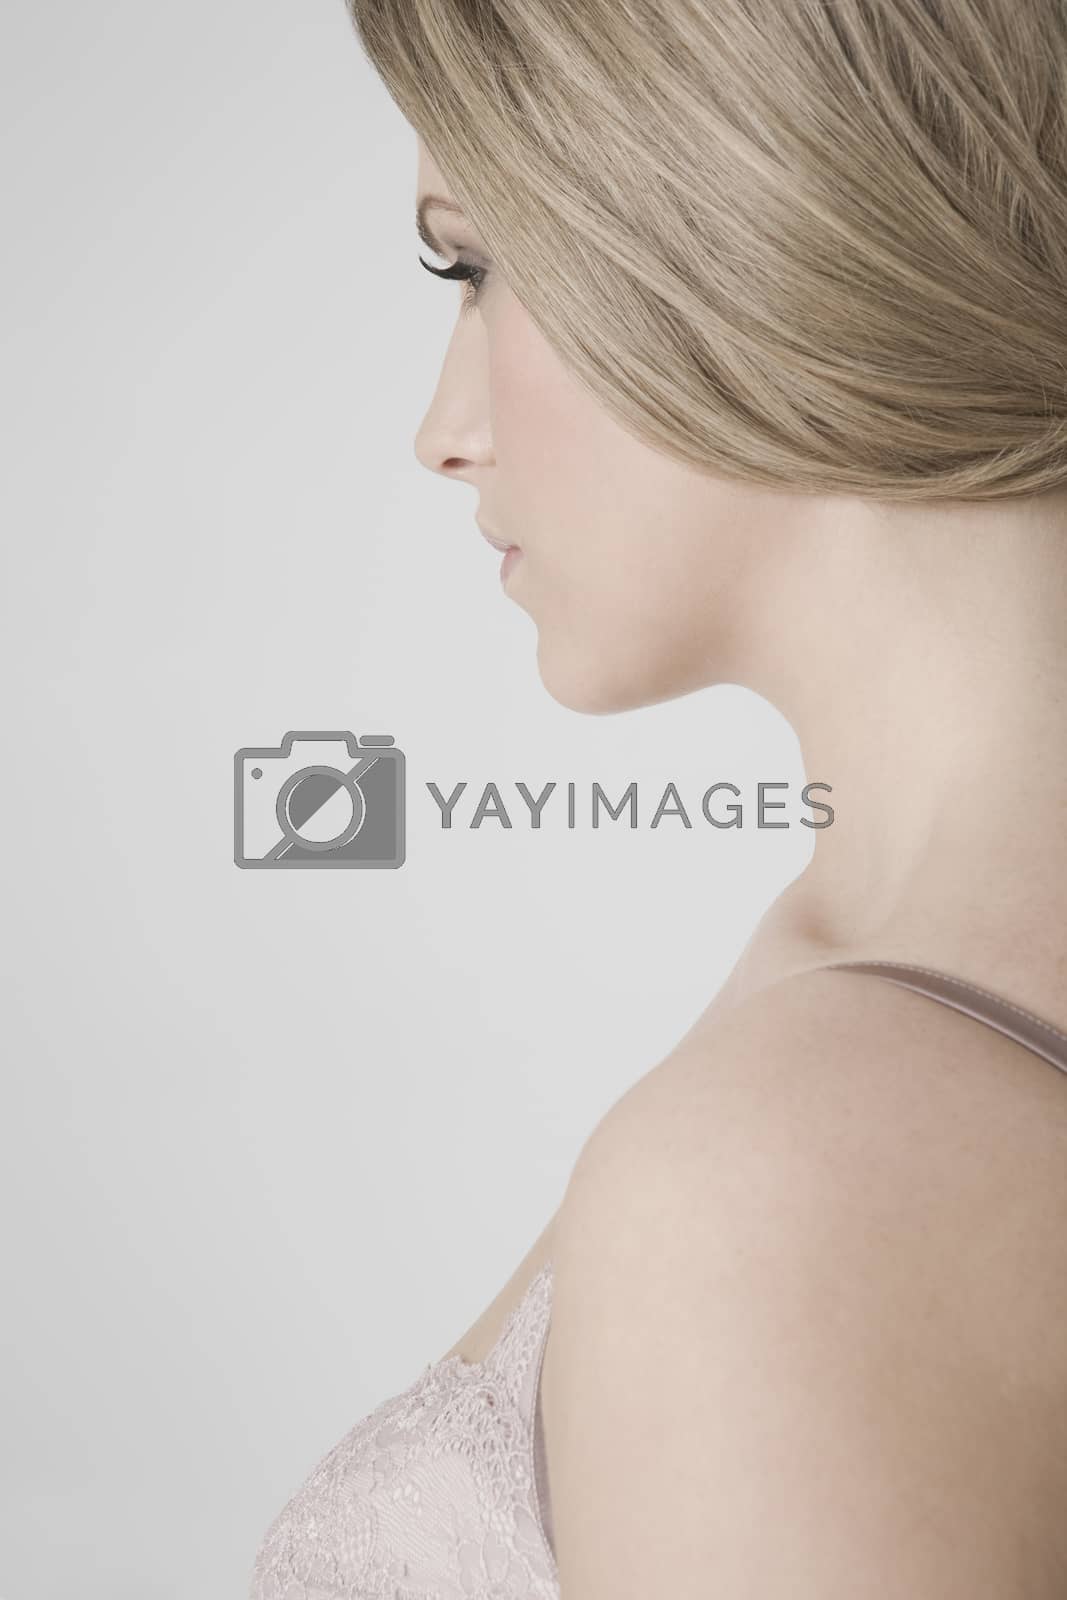 Royalty free image of Sexy young woman by moodboard